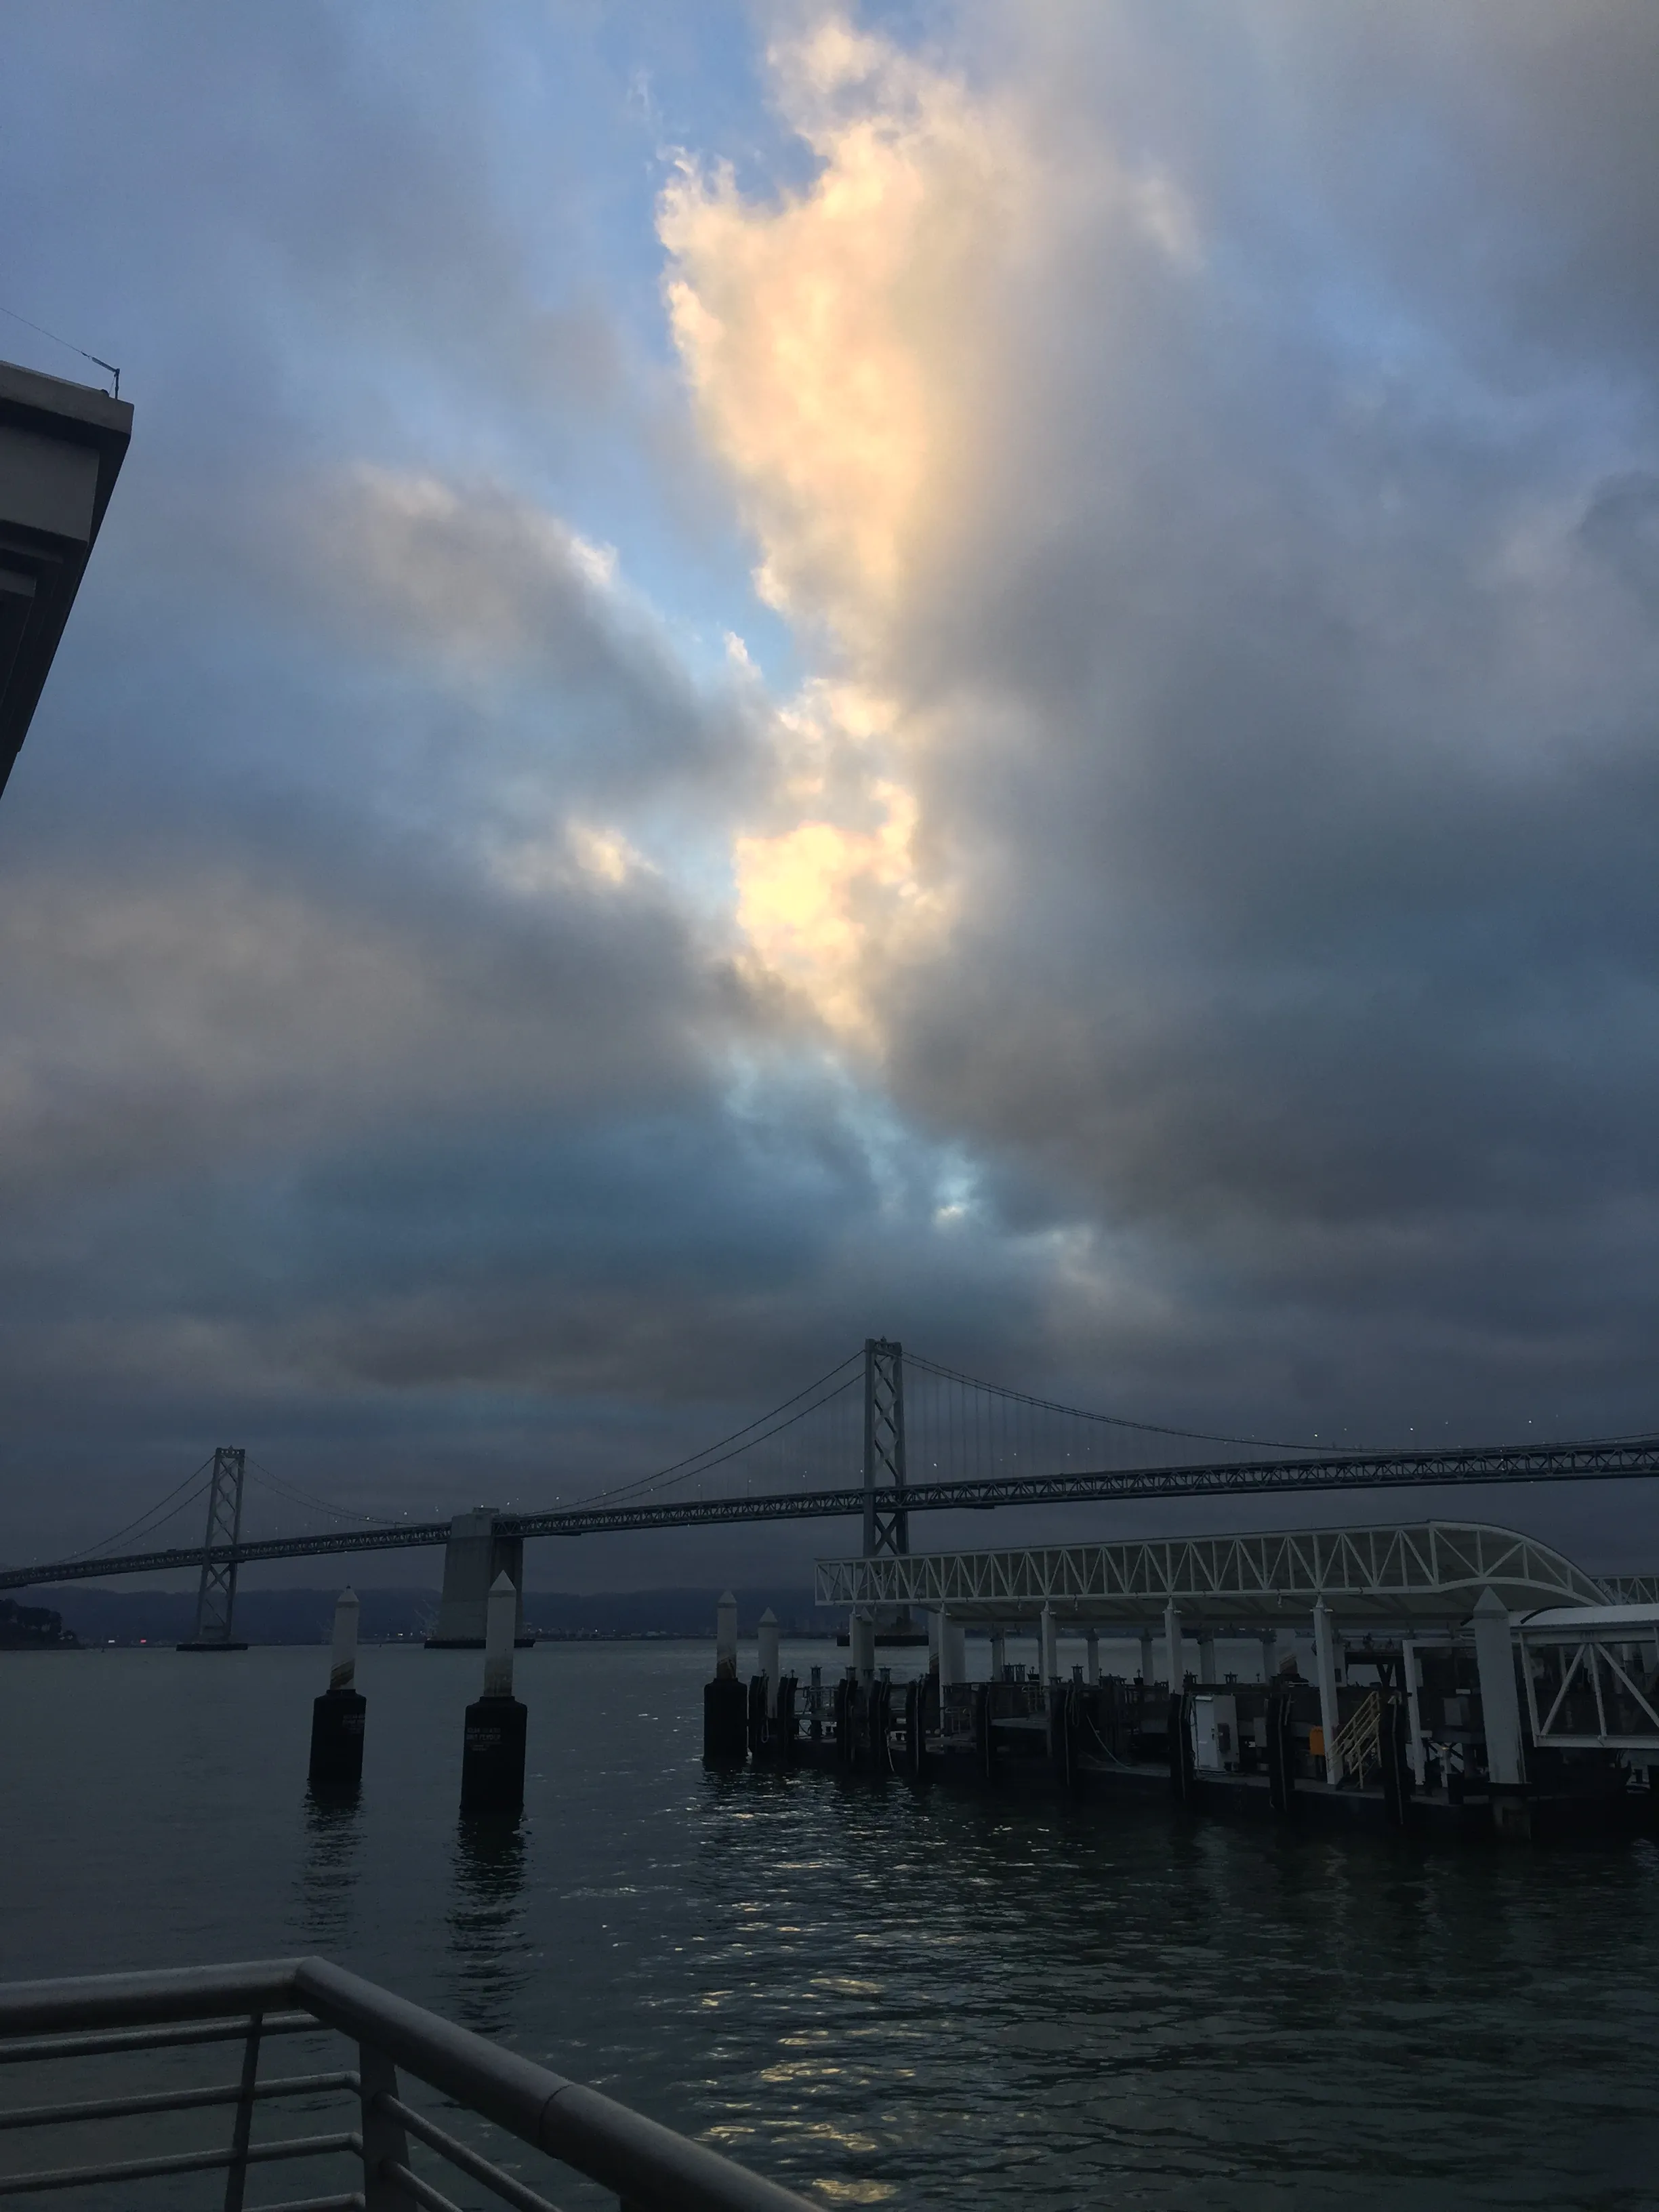 Here's the cloudy sunrise! That's Oakland-Bay Bridge in the
pic.